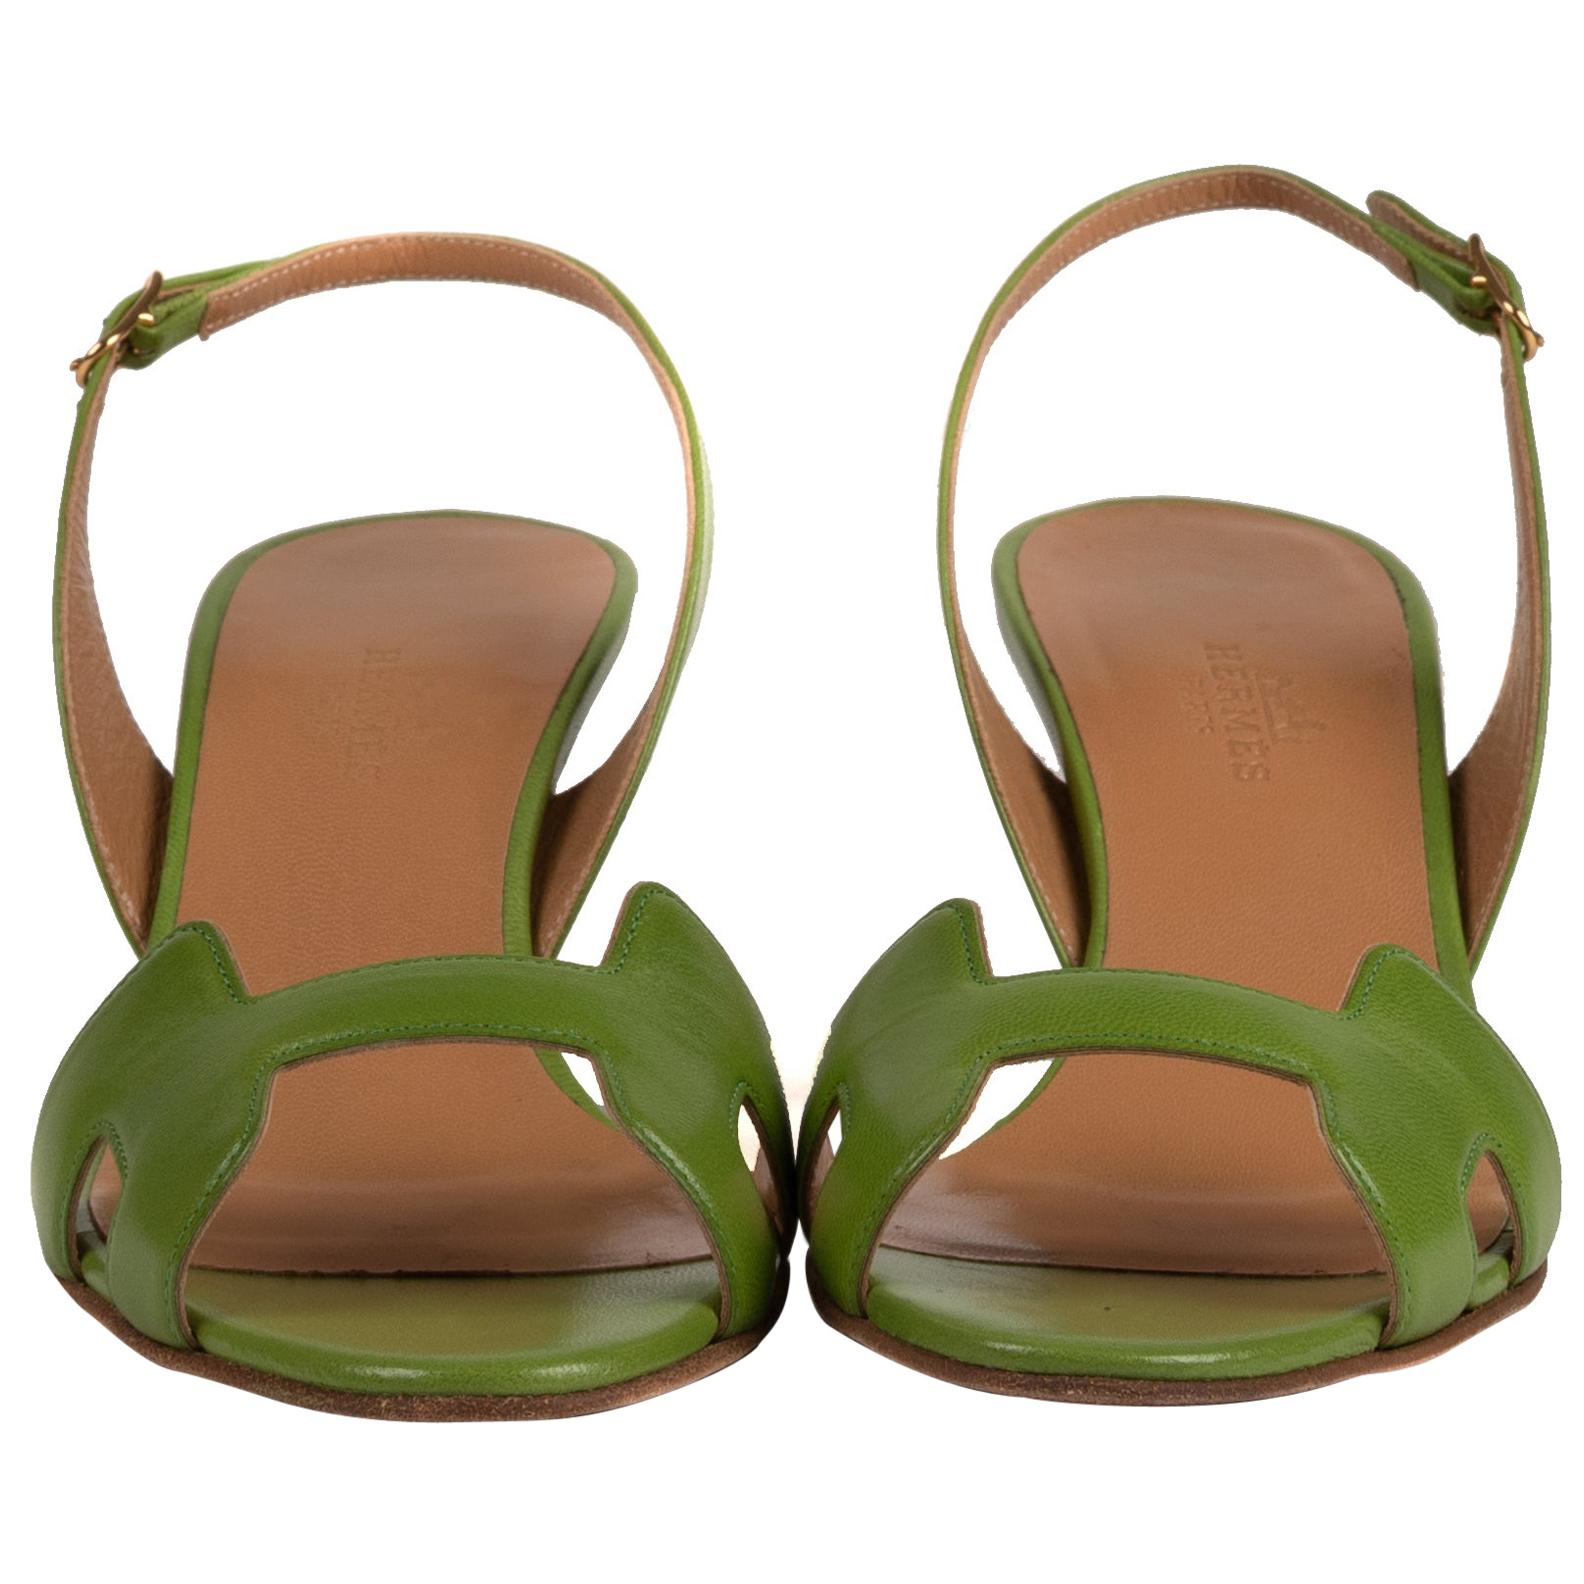 Hermès Night Sandals in green leather, size 36, 5, very good condition !